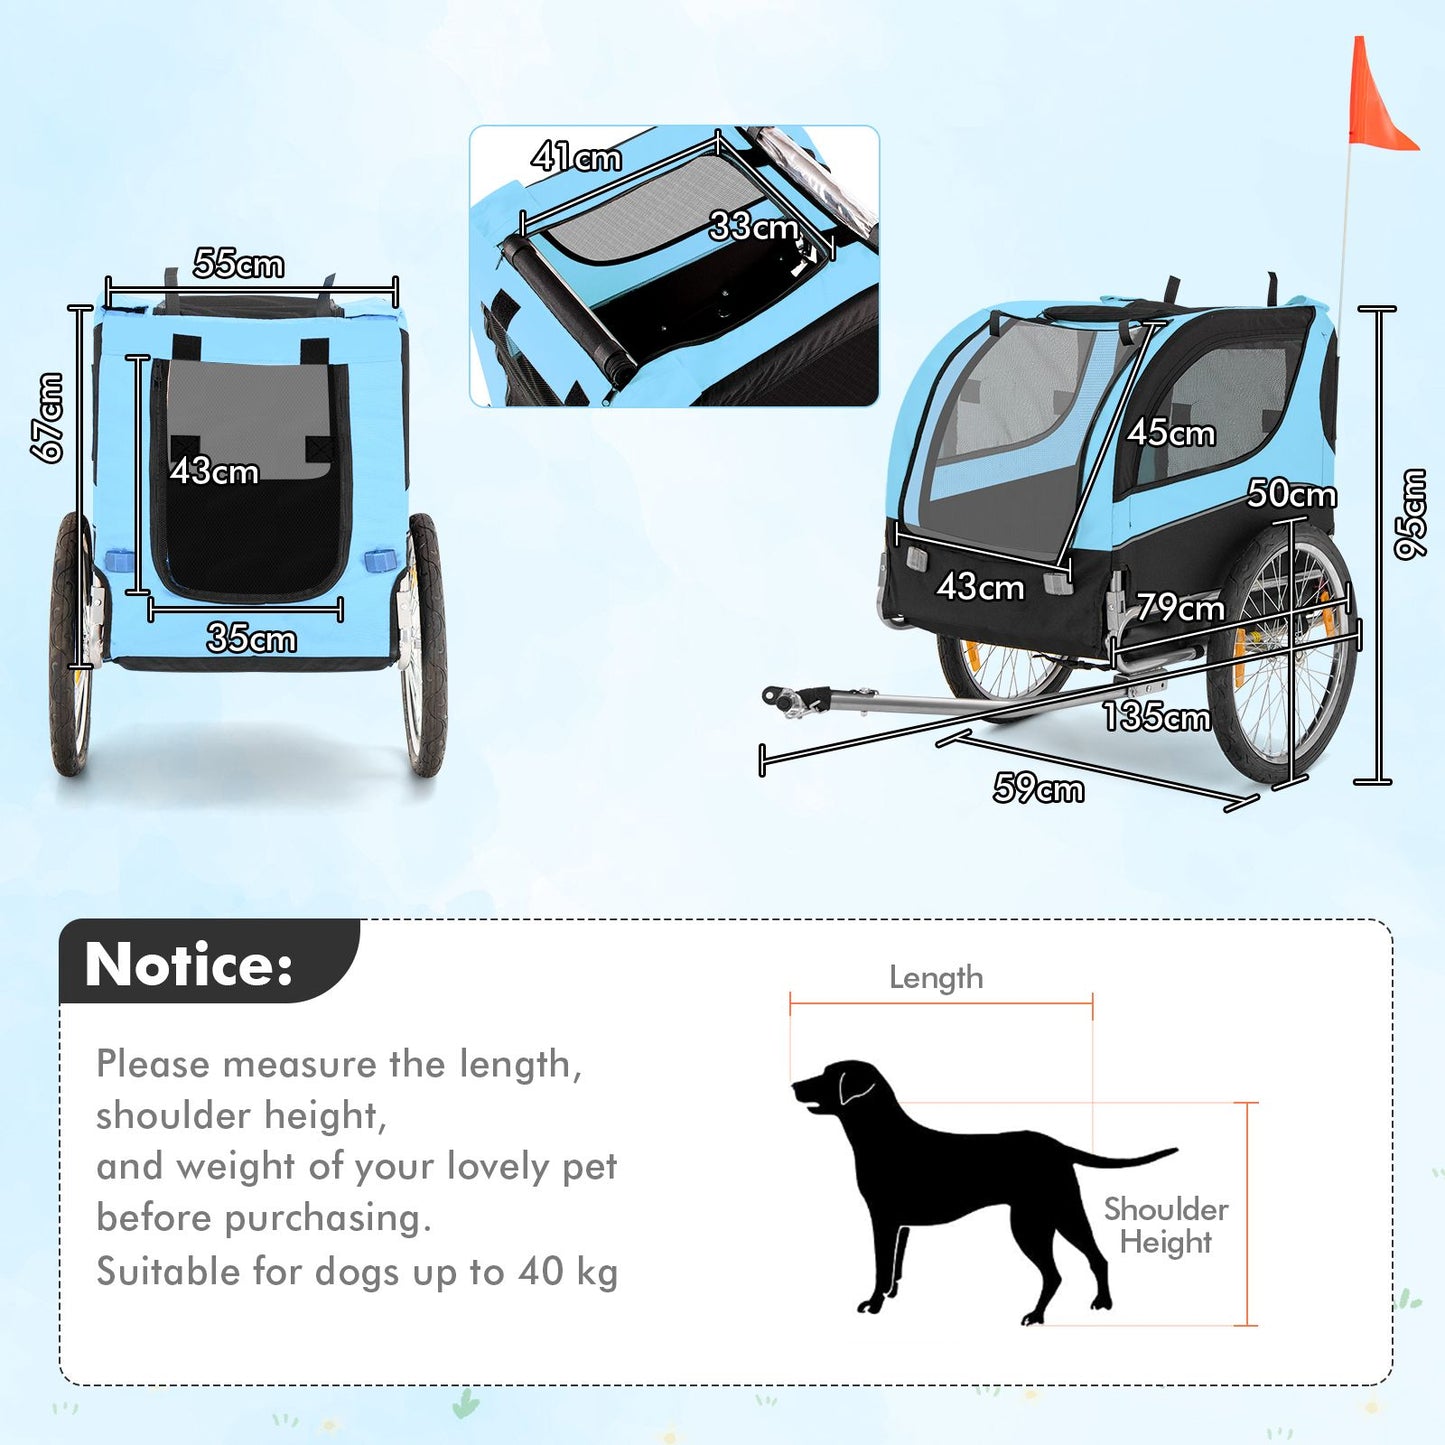 Folding Pet Bike Trailer with 3 Zippered Doors and 8 Reflectors